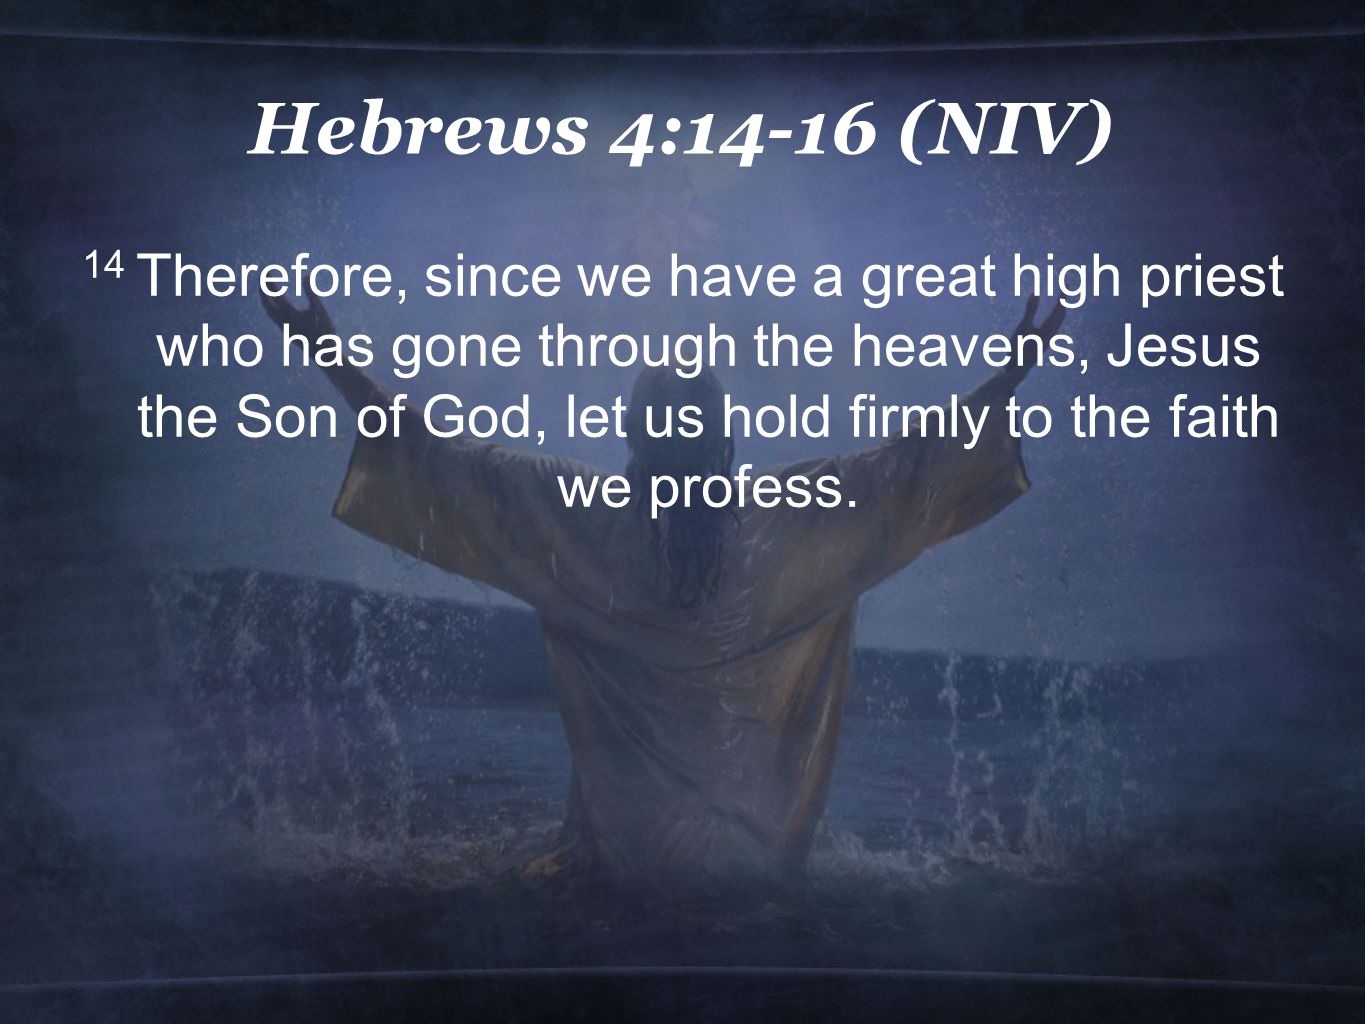 Hebrews 4:14-16 (NIV) 14 Therefore, since we have a great high priest who has gone through the heavens, Jesus the Son of God, let us hold firmly to the faith we profess.